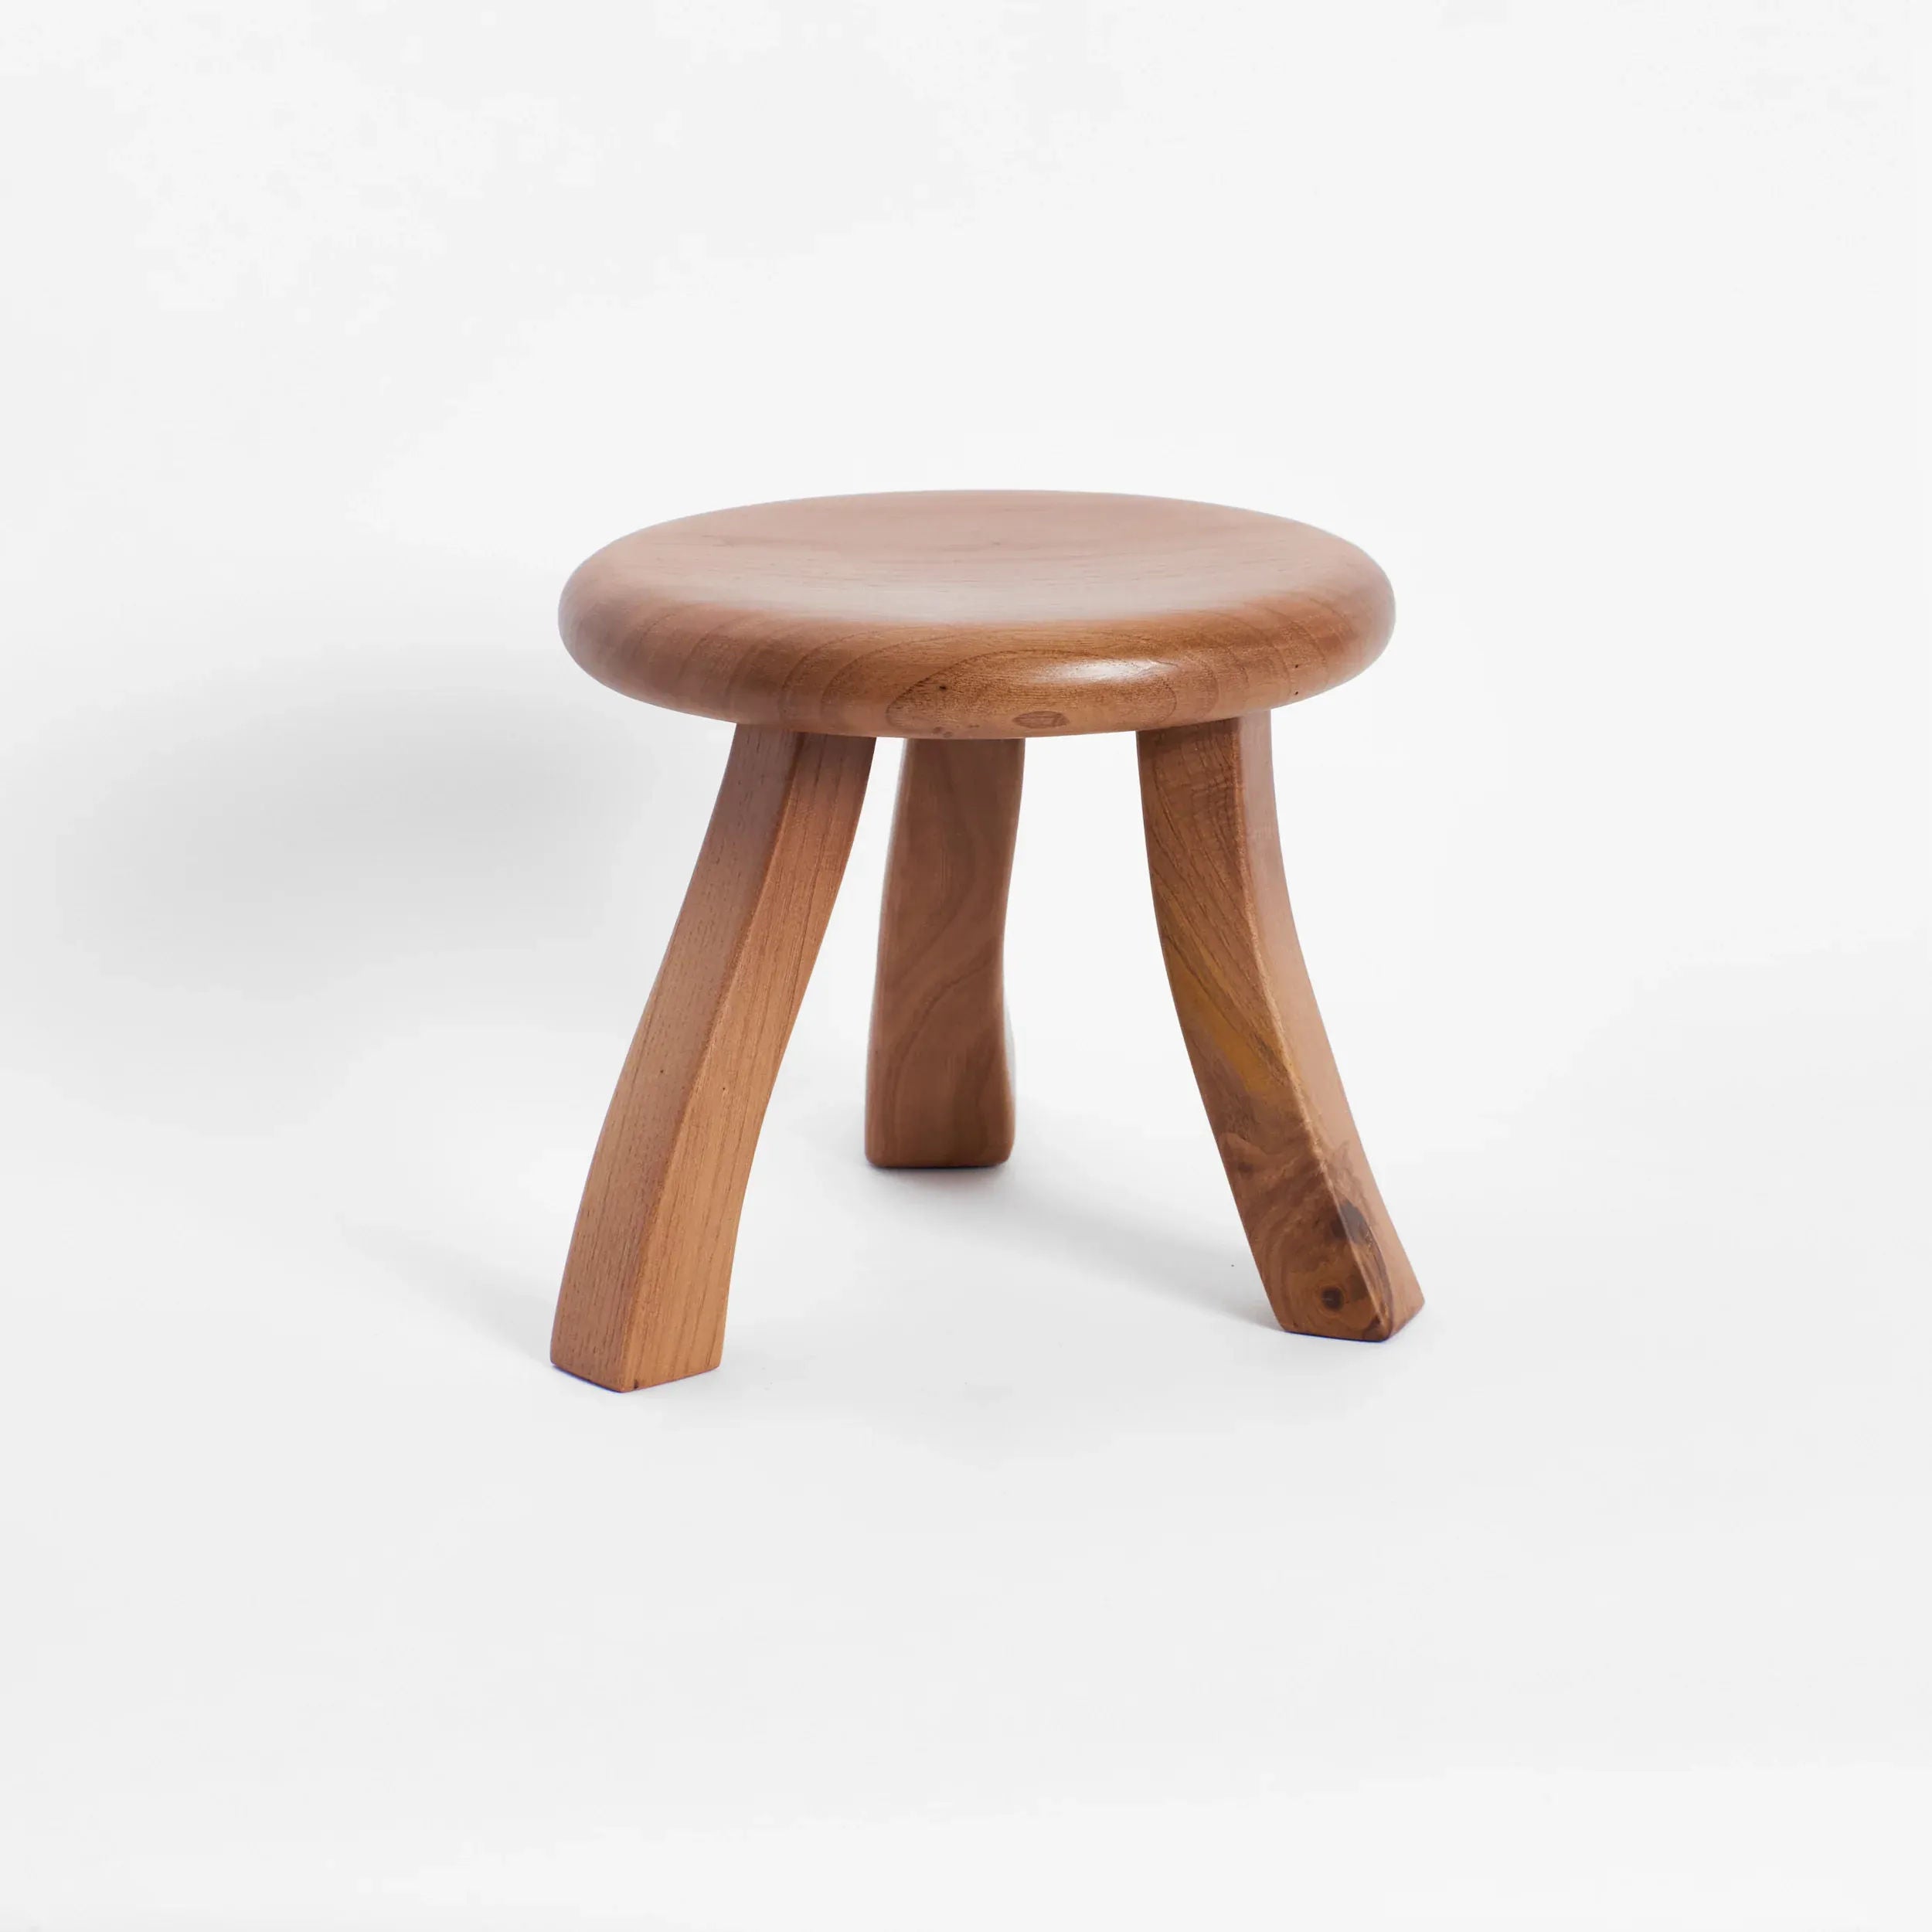 End Tables Foot Stool in Oak Project 213A